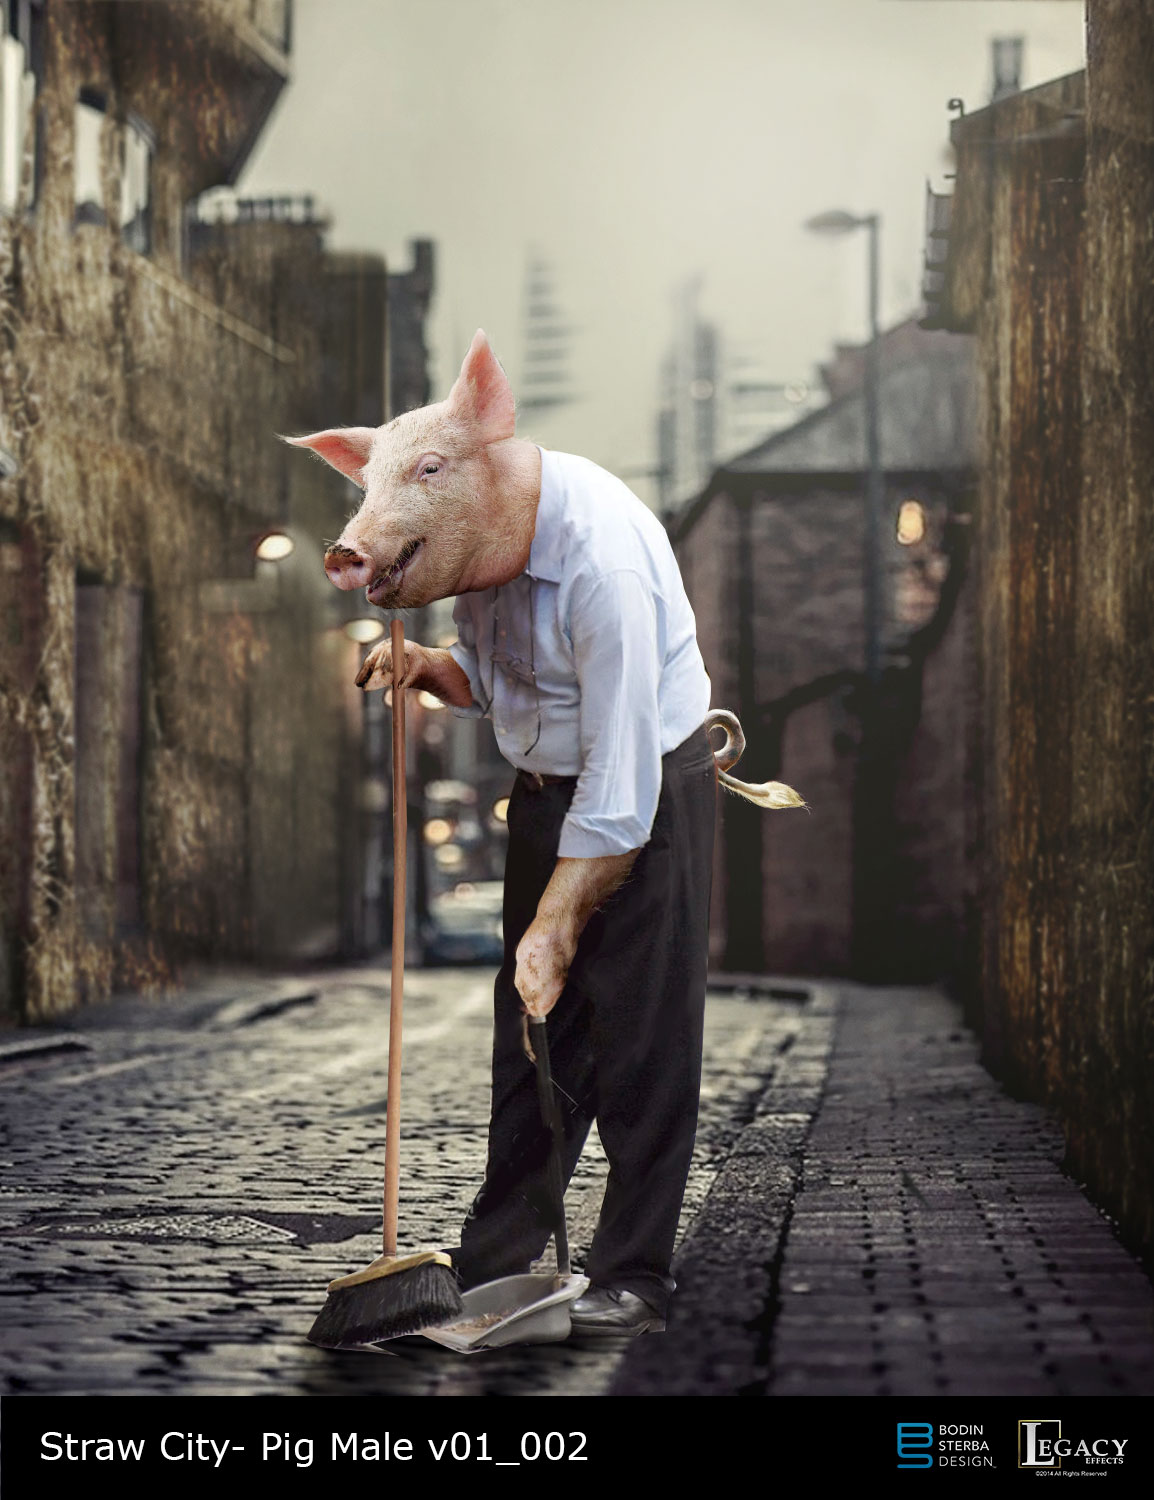 The Real Cost Commercial: "Straw City" Shop Owner Pig